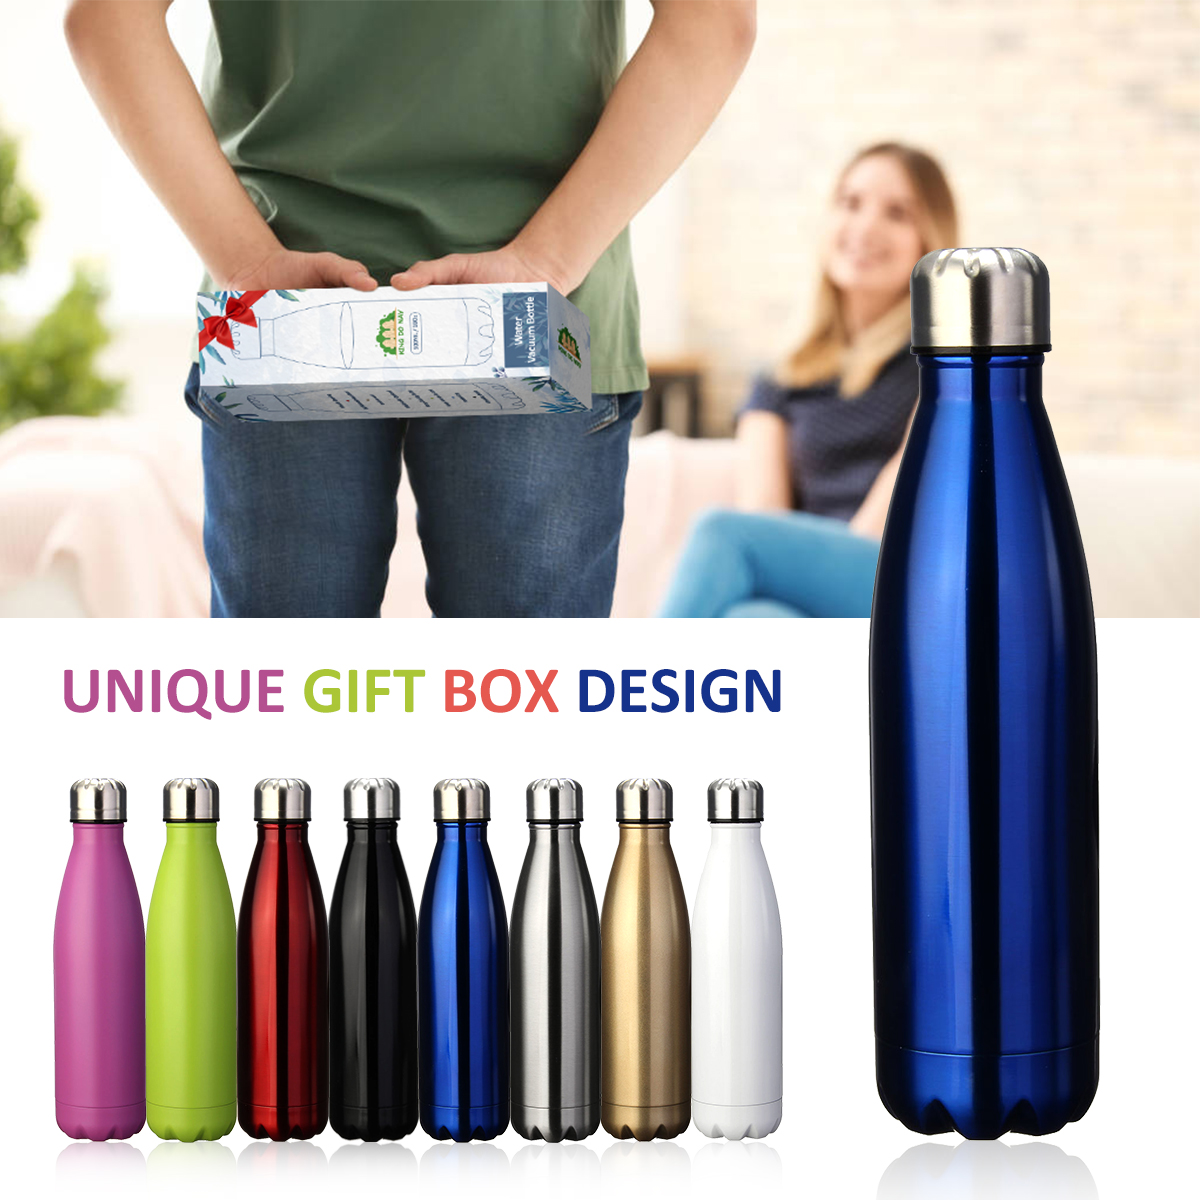 King-Do-Way-500ml-Insulated-Stainless-Steel-Water-Vacuum-Bottle-Double-Walled-for-Outdoor-Sports-Hik-1075556-4